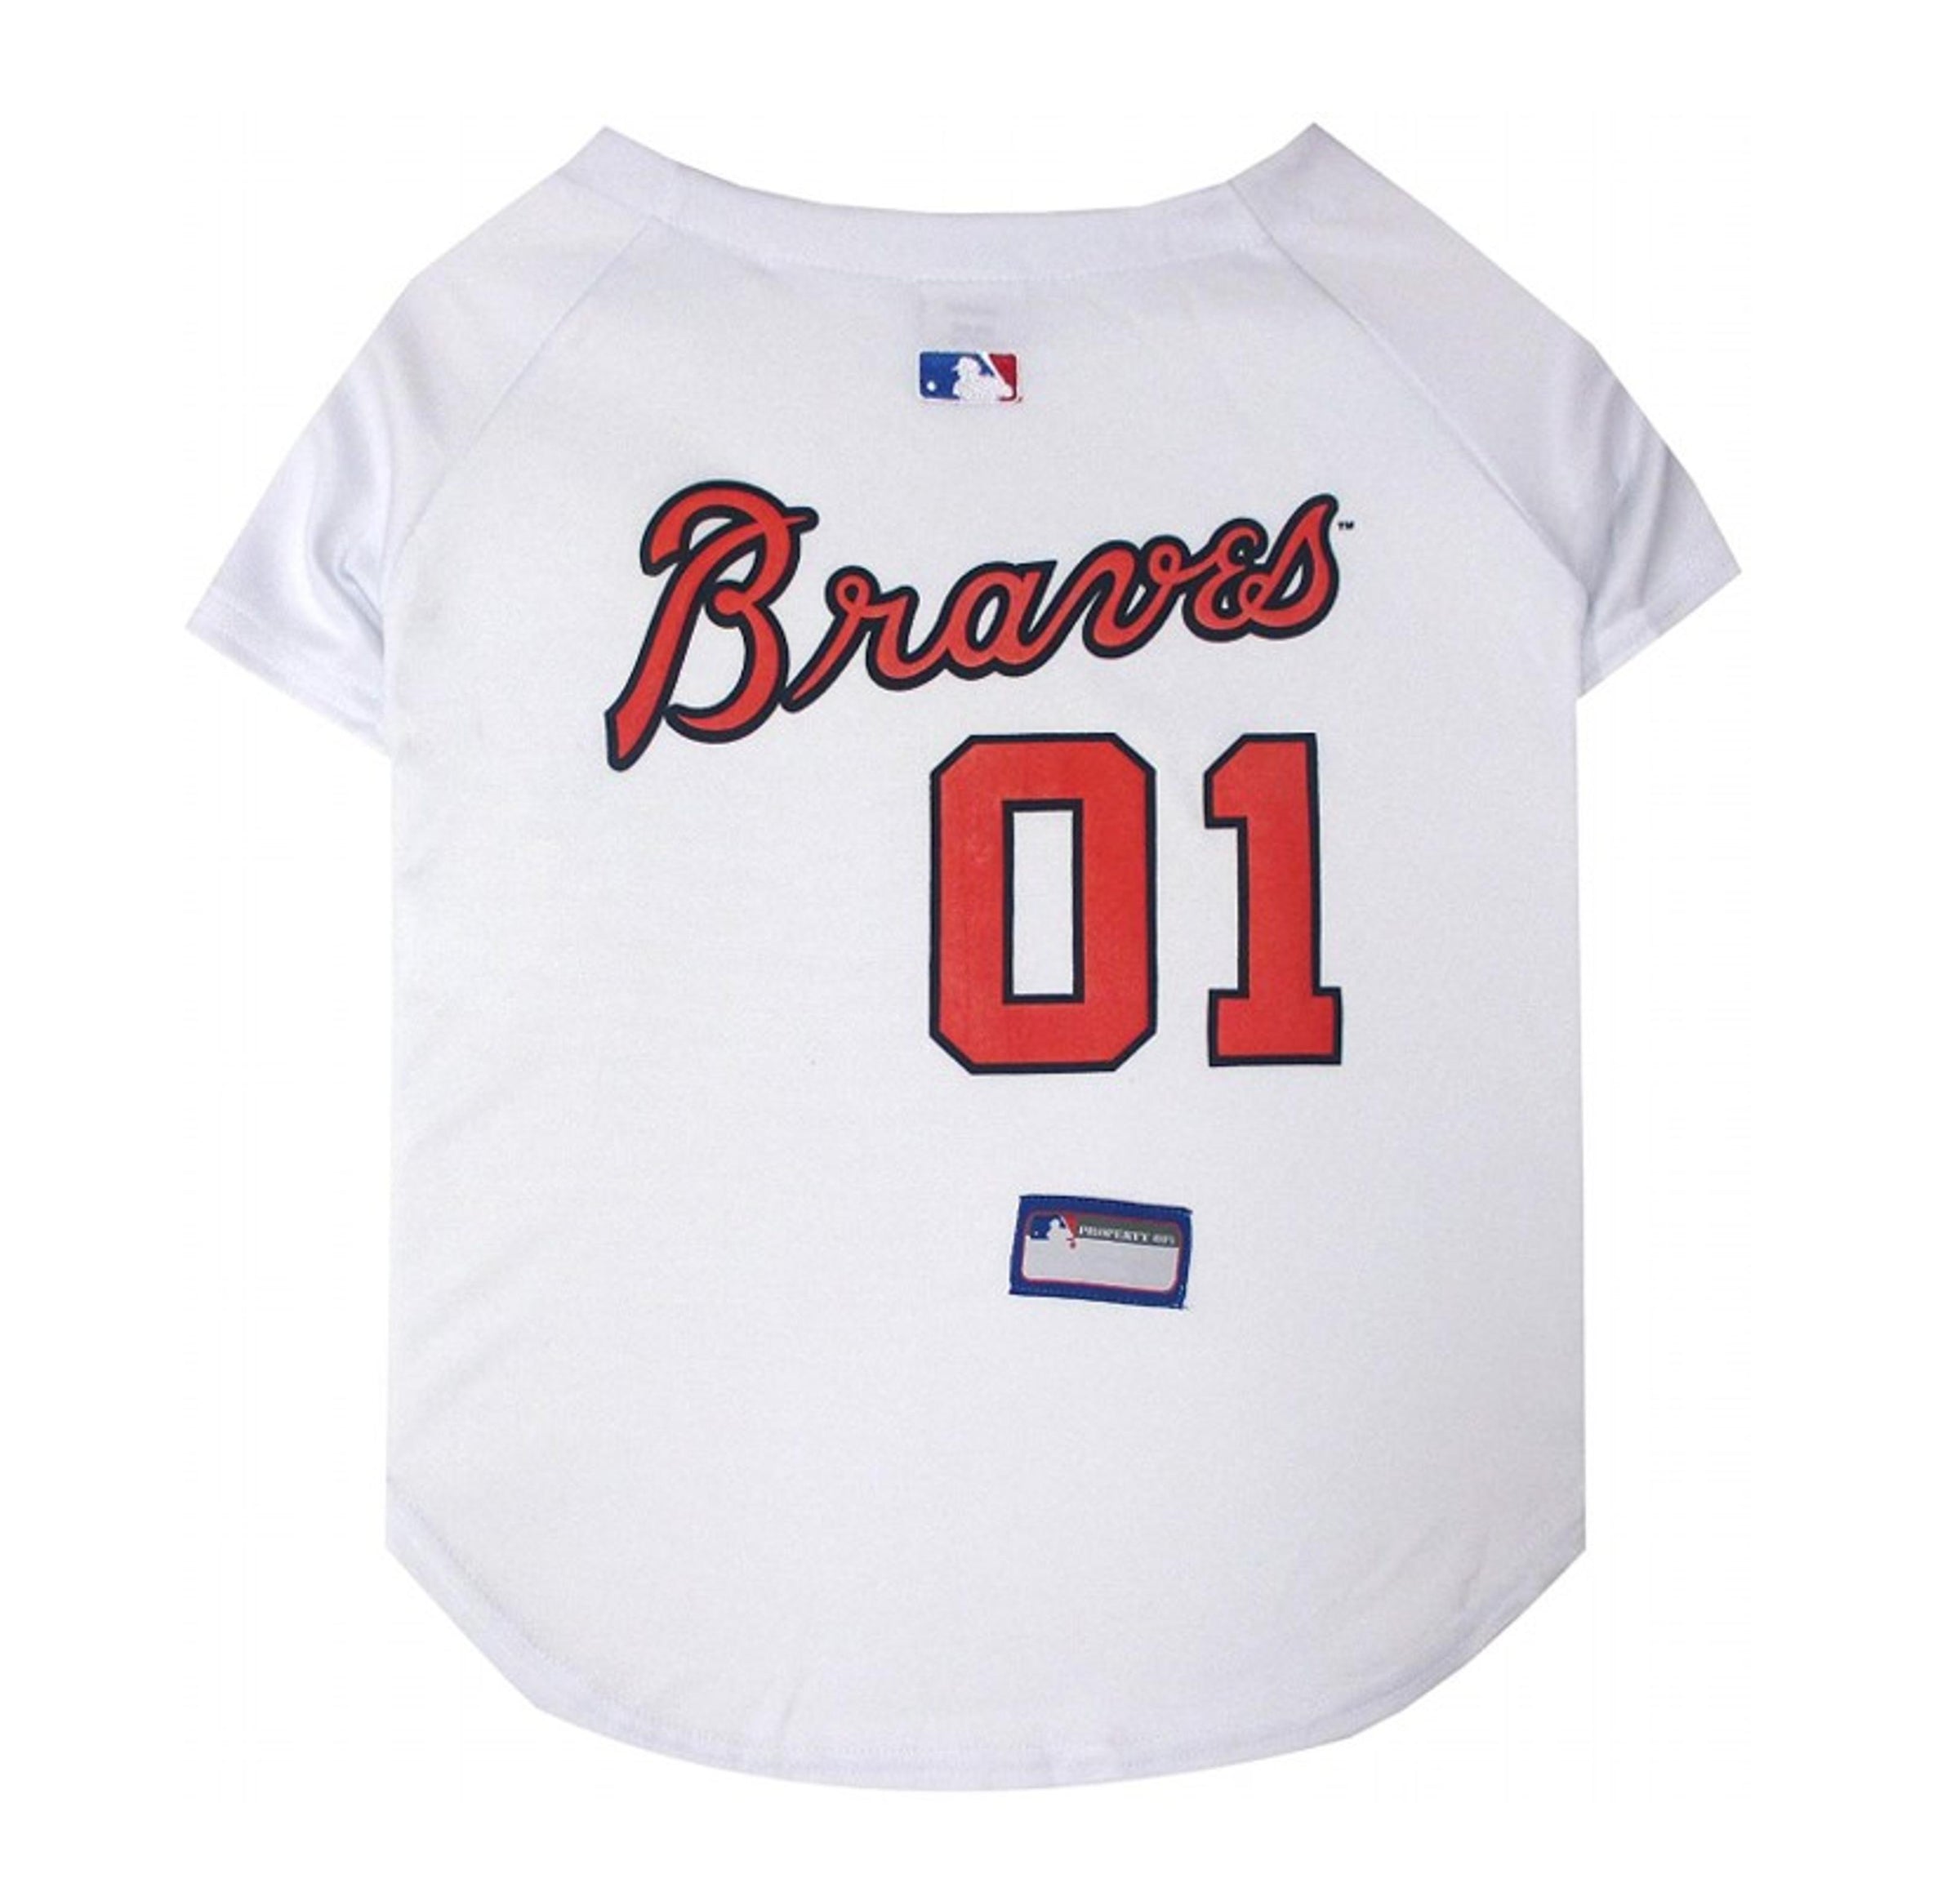 Atlanta Braves Black Friday Deals, Clearance Braves Apparel, Discounted  Braves Gear